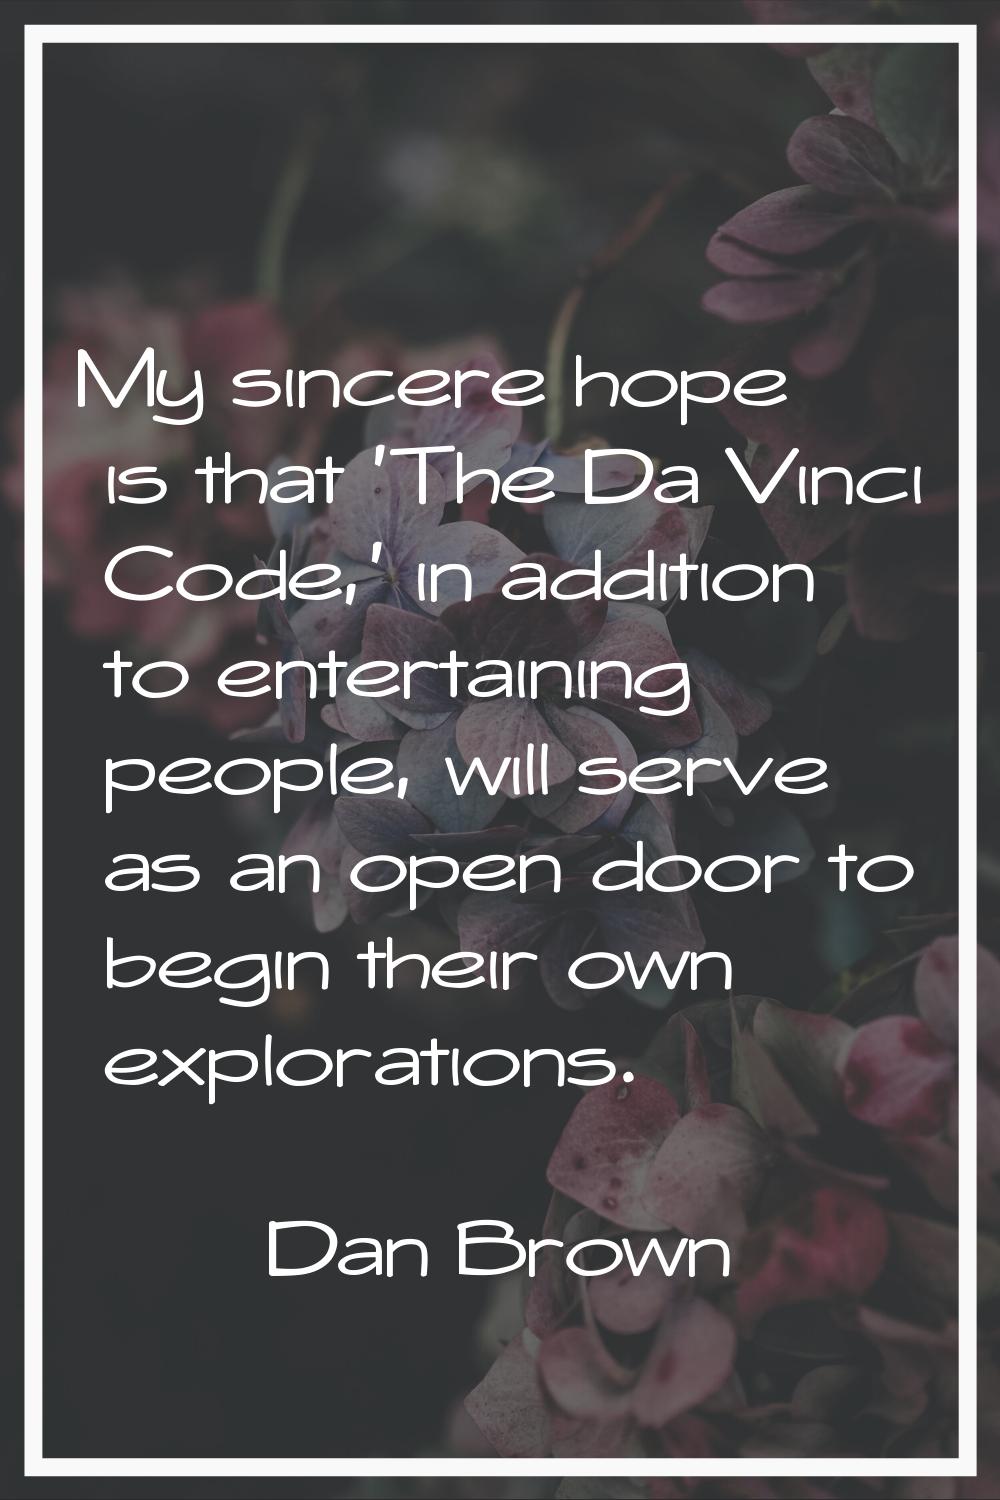 My sincere hope is that 'The Da Vinci Code,' in addition to entertaining people, will serve as an o